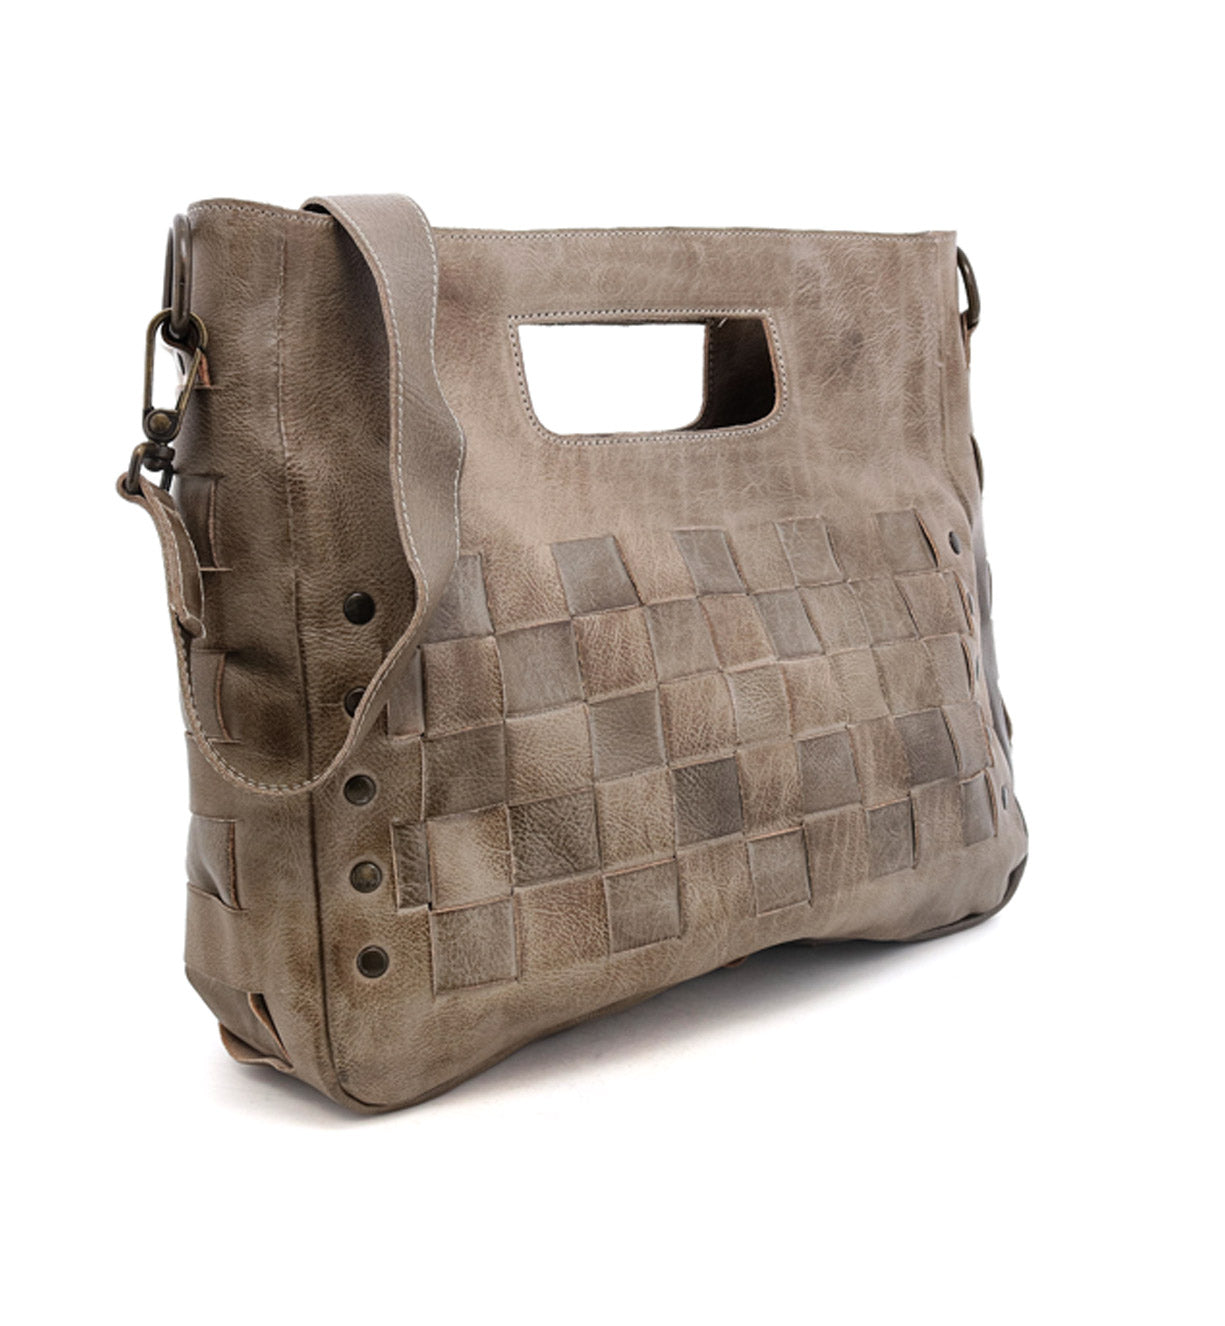 A grey leather Orchid bag with a woven pattern by Bed Stu.